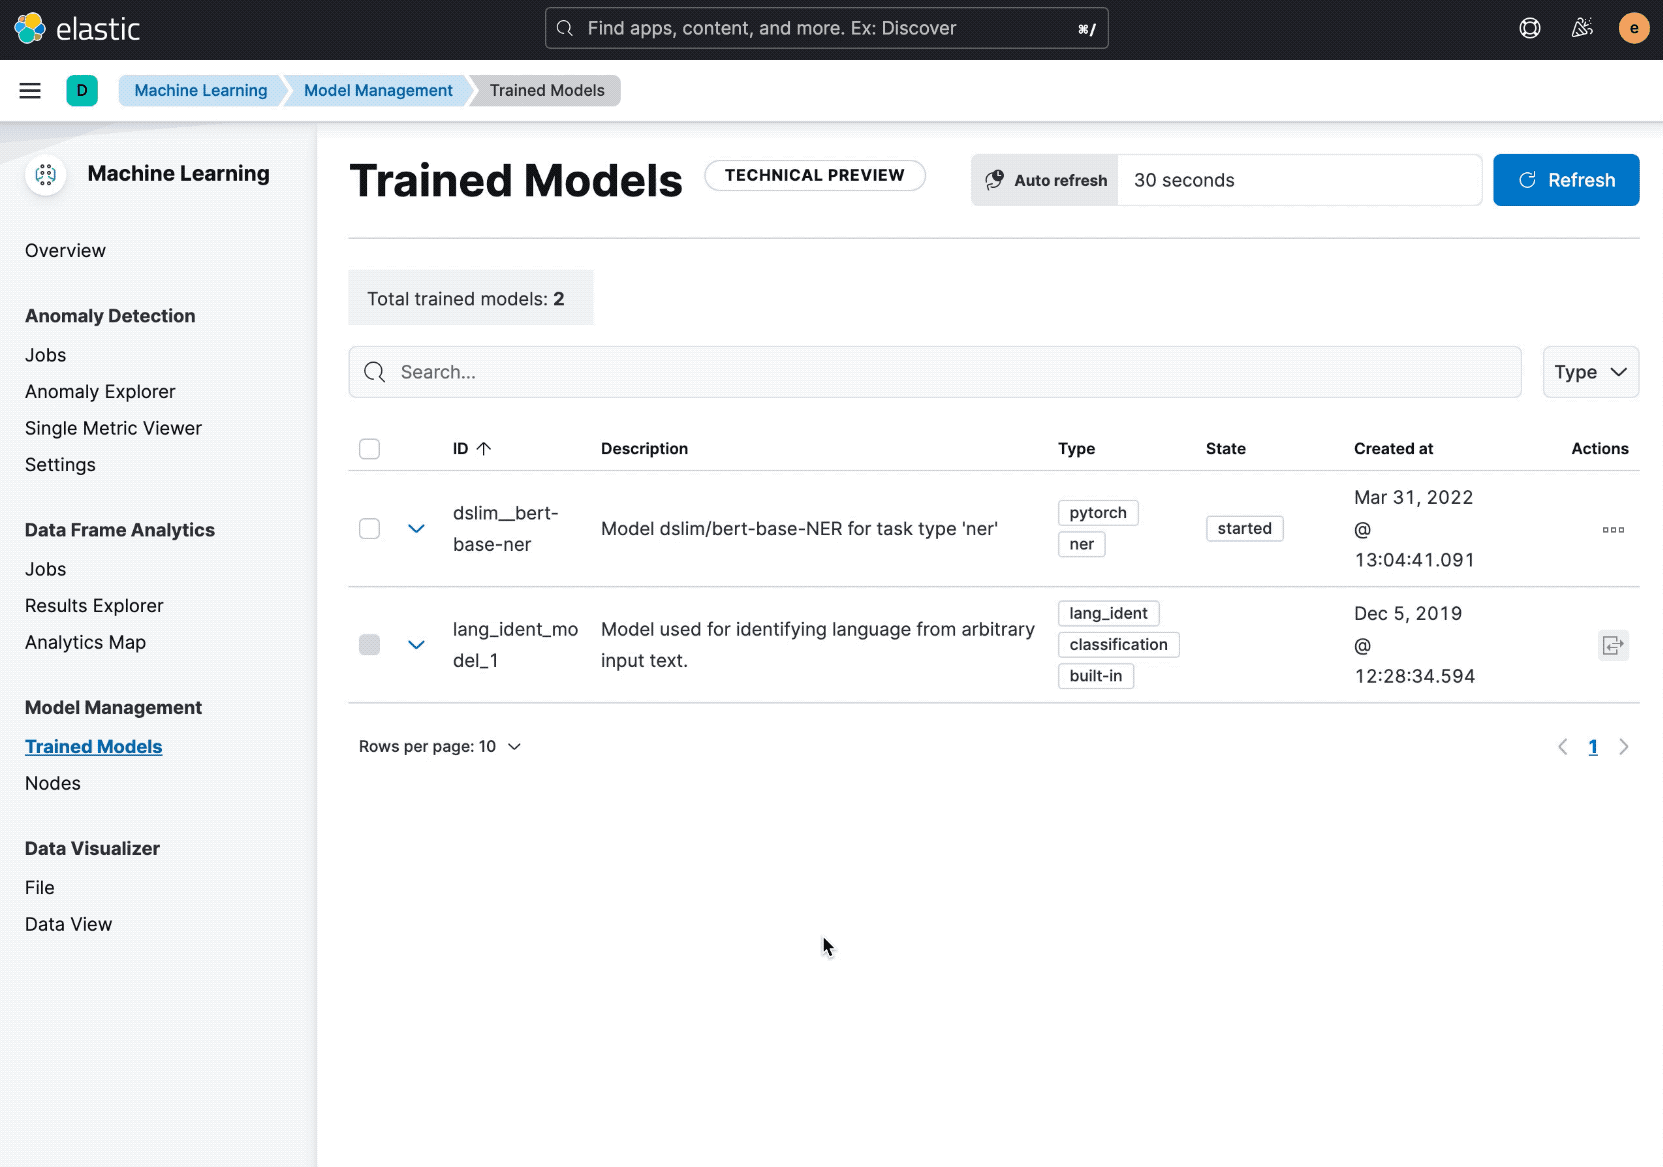 Testing trained models in the ML UI